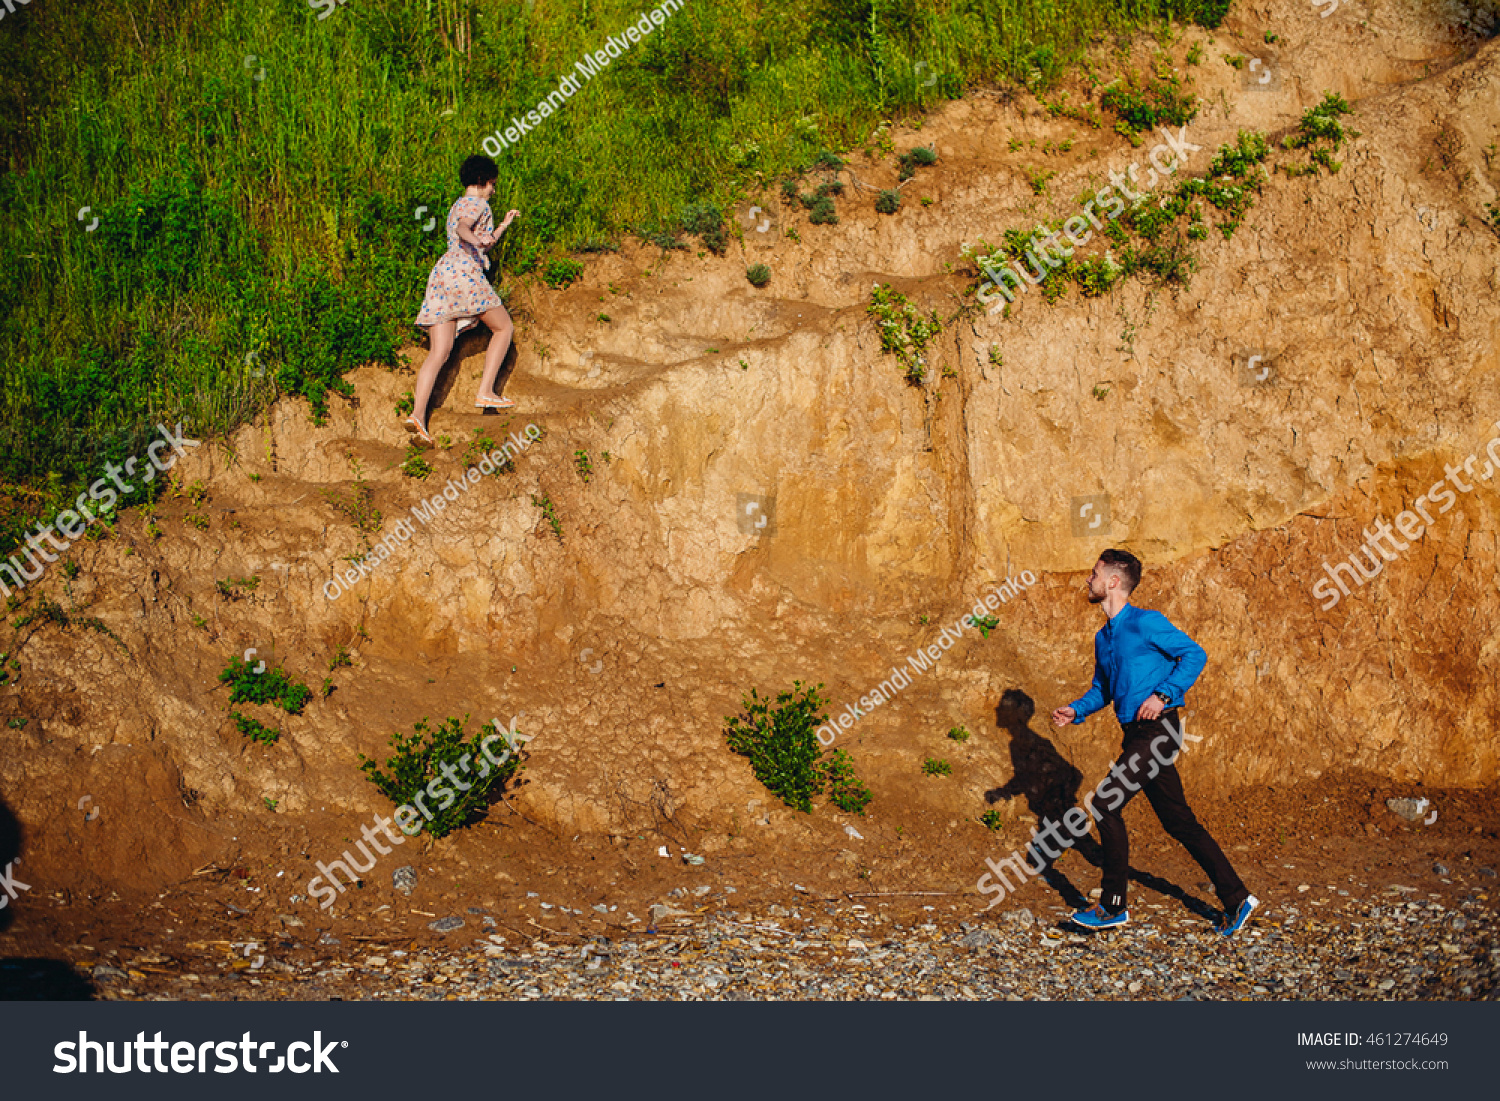 Man runs to the woman while she climbs the hill #461274649